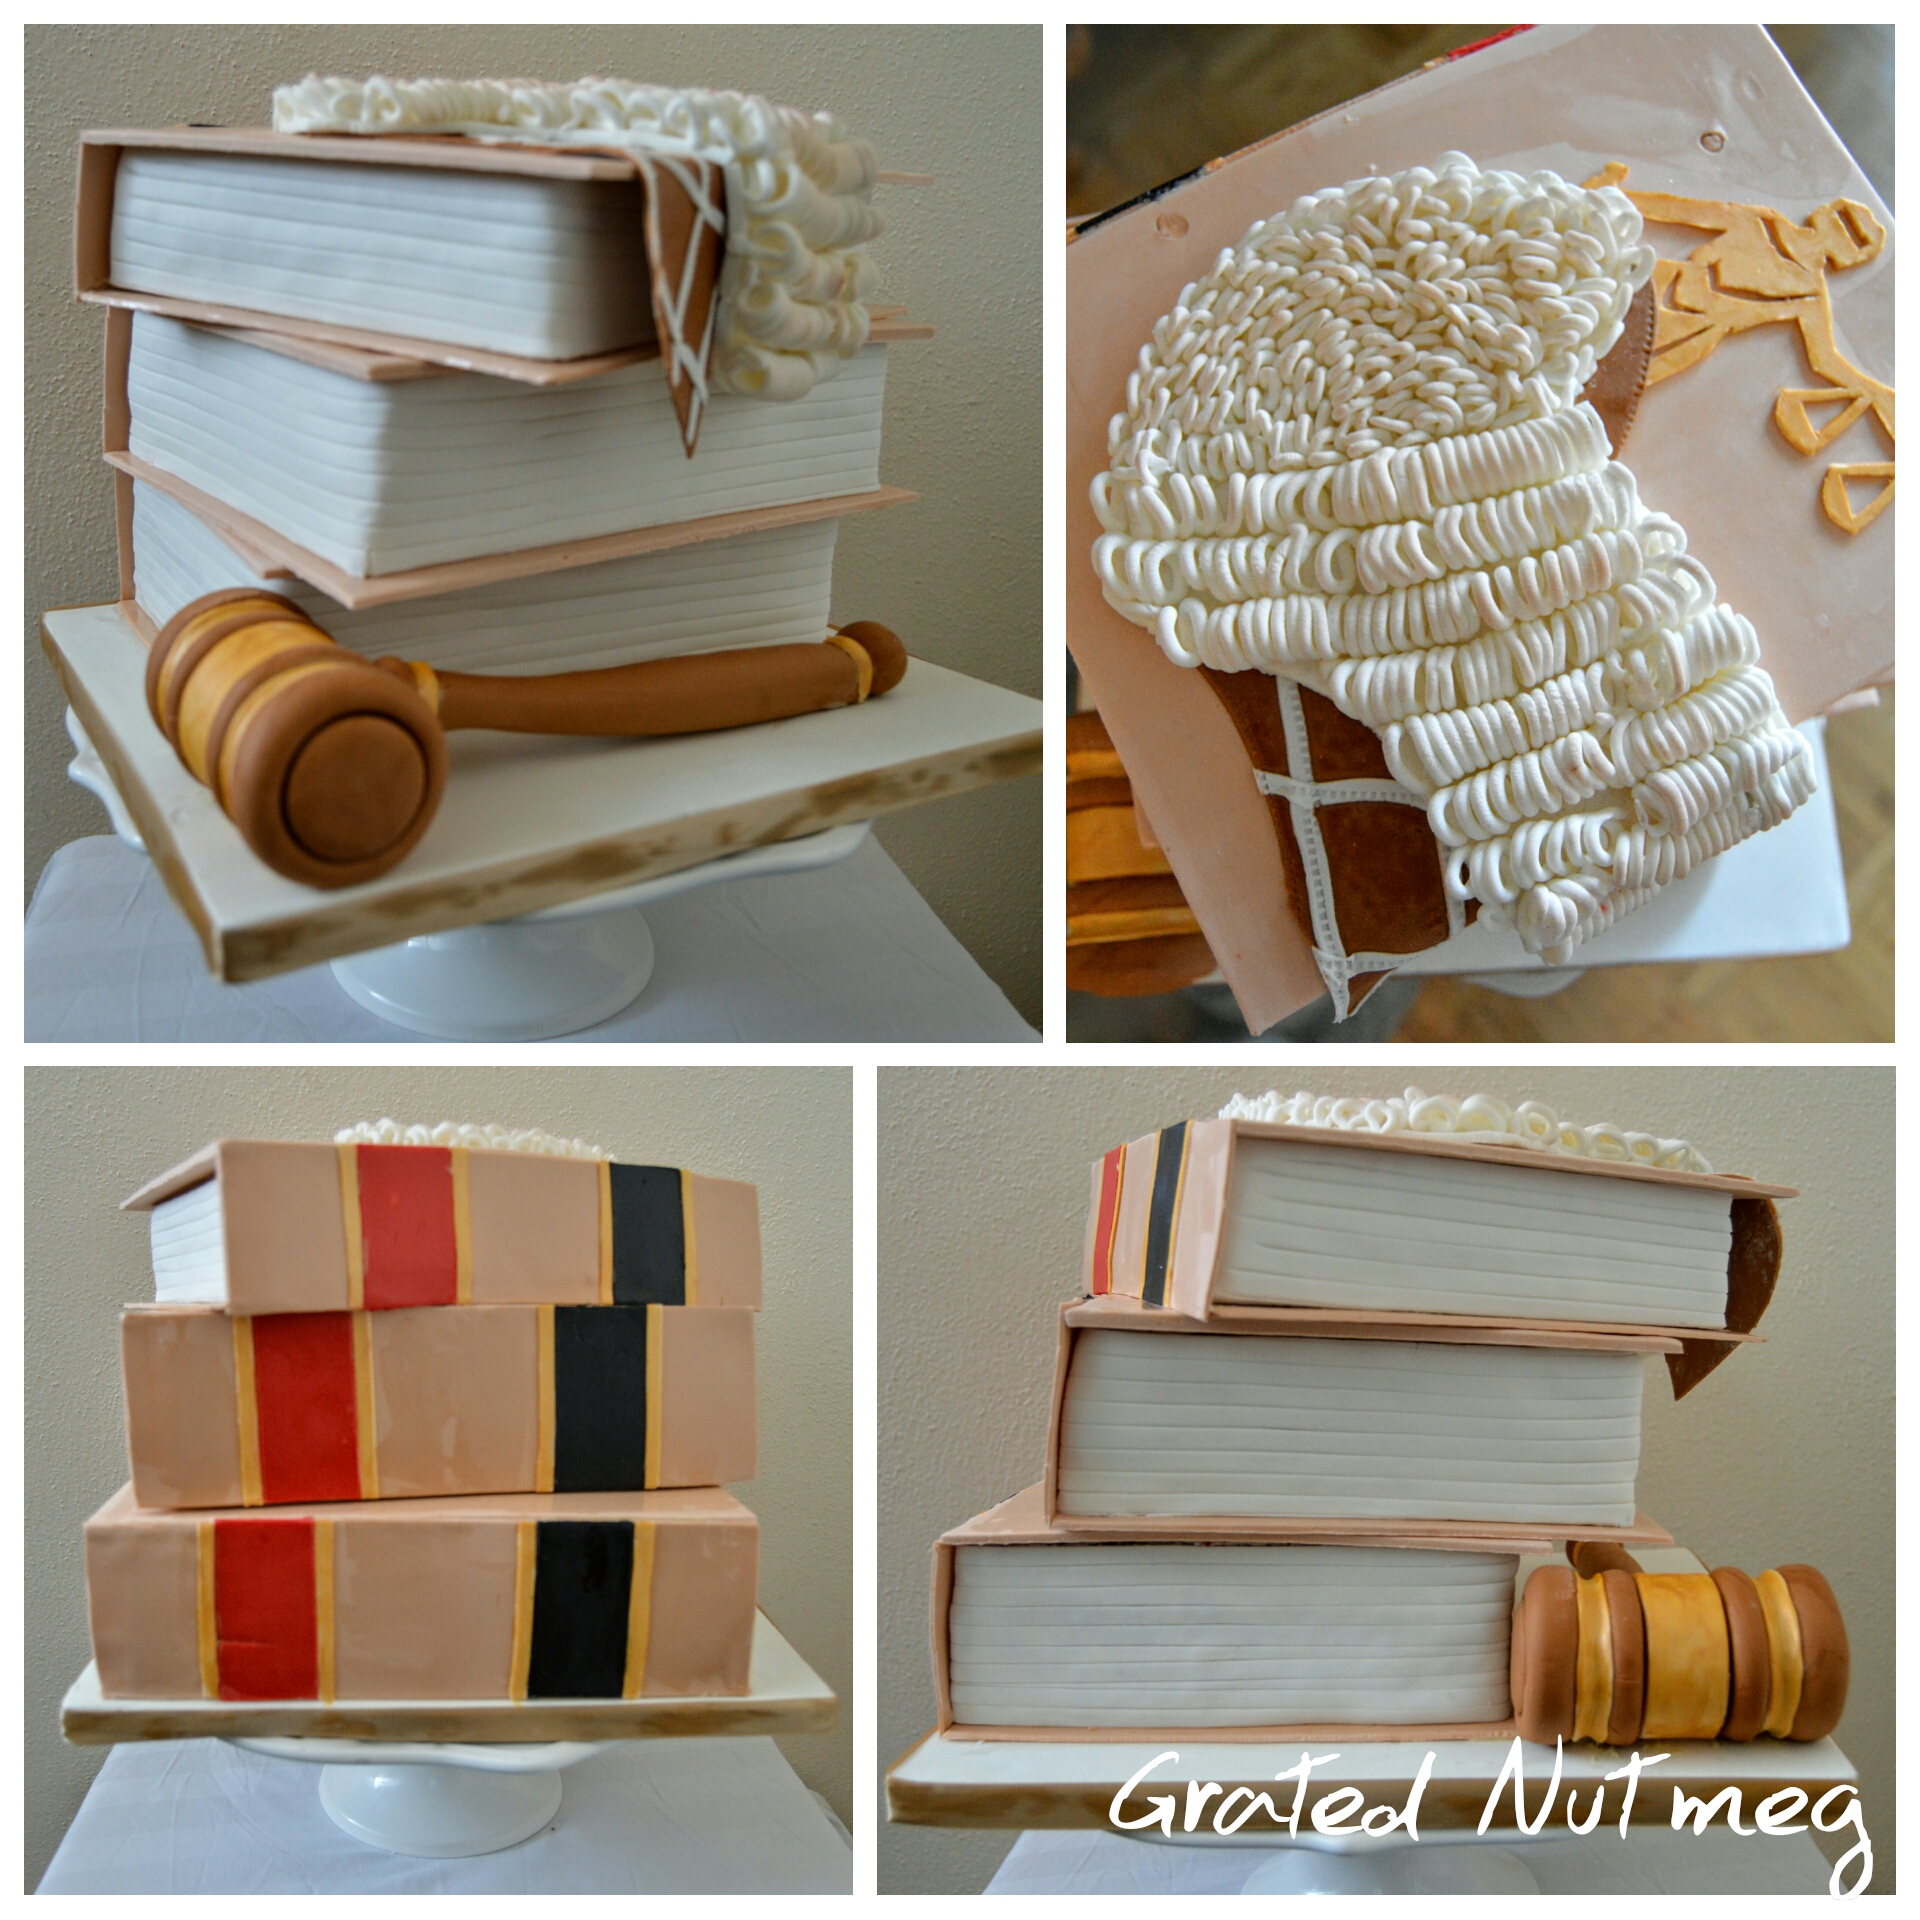 Law Review Cake